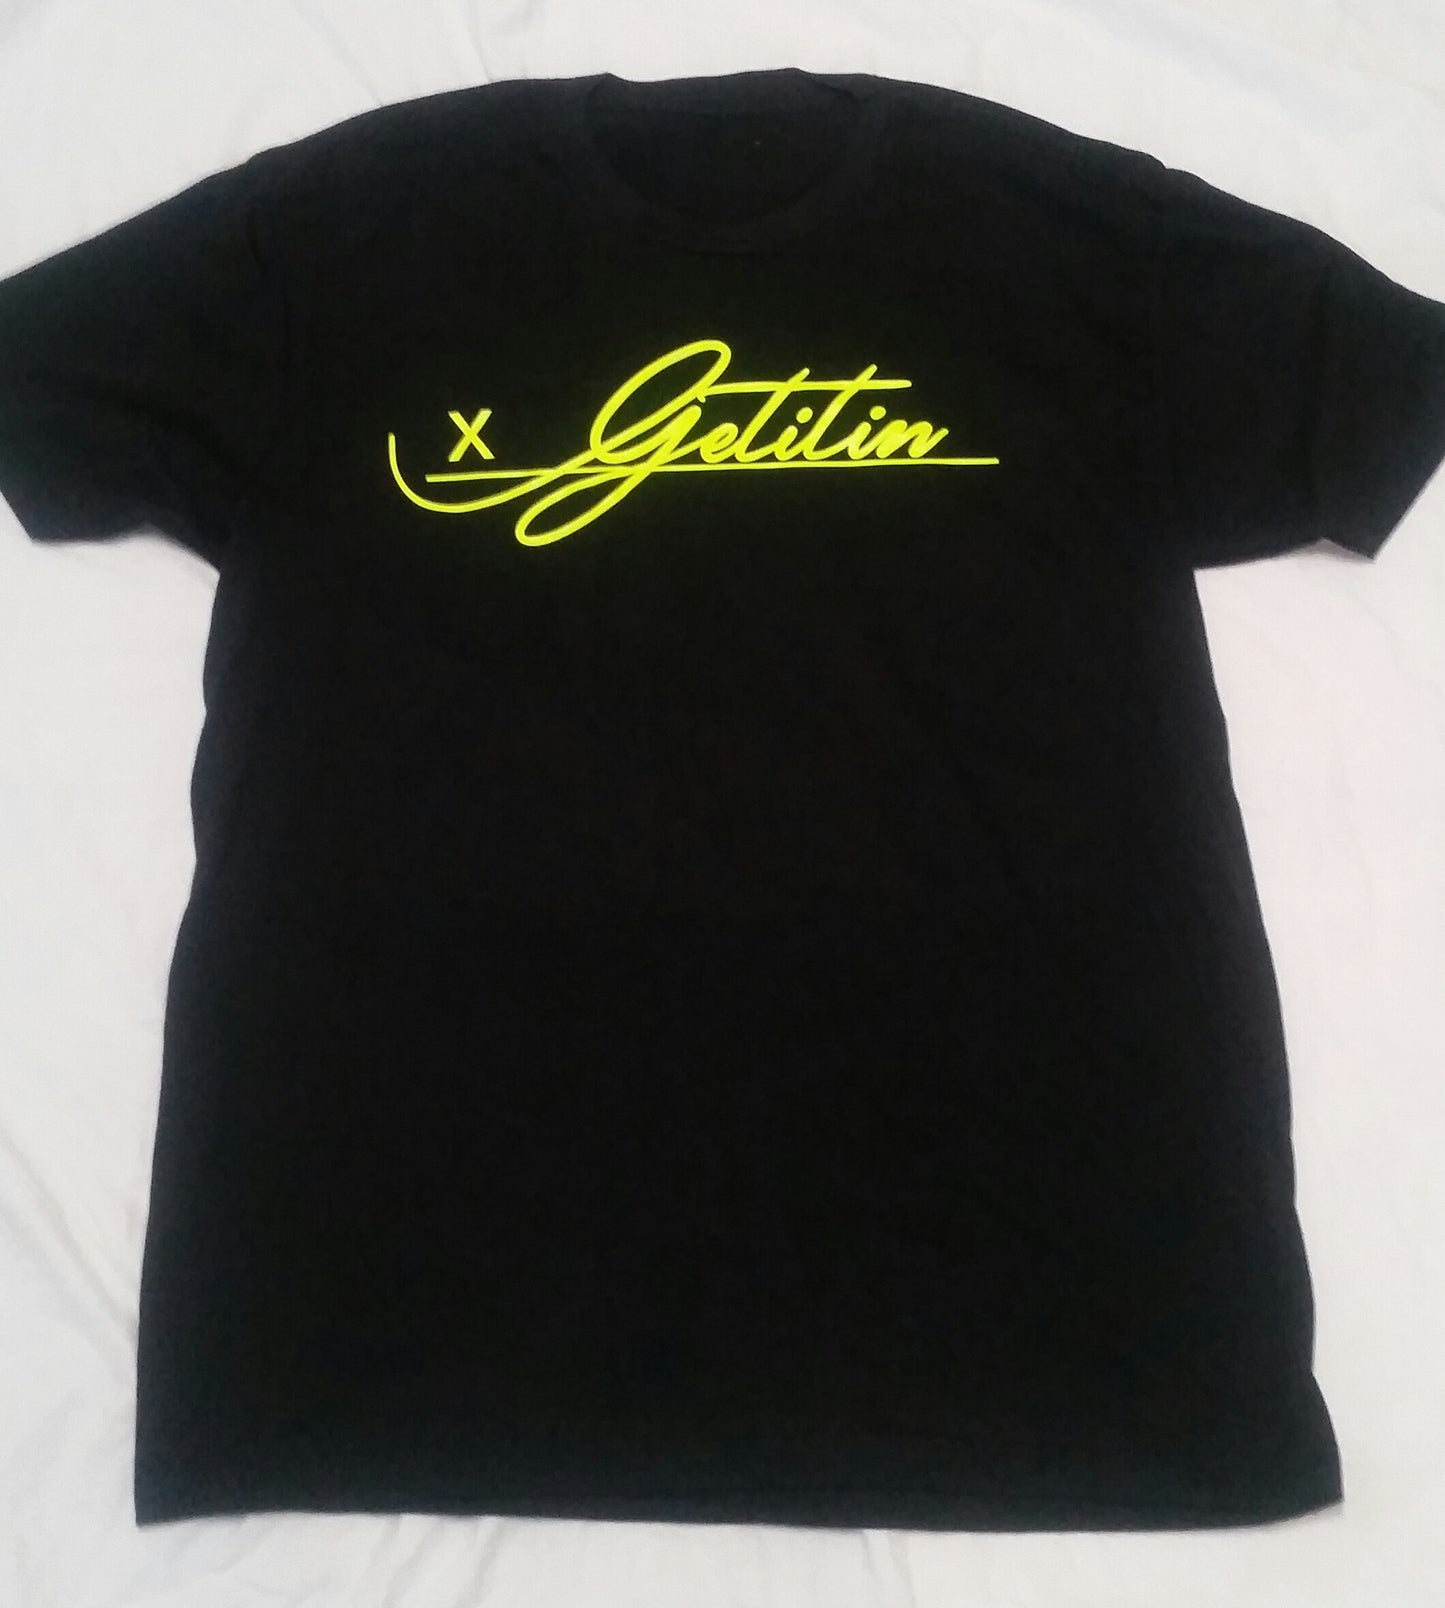 GET IT IN Signature "All on the line" T-shirt - GET IT IN Apparel